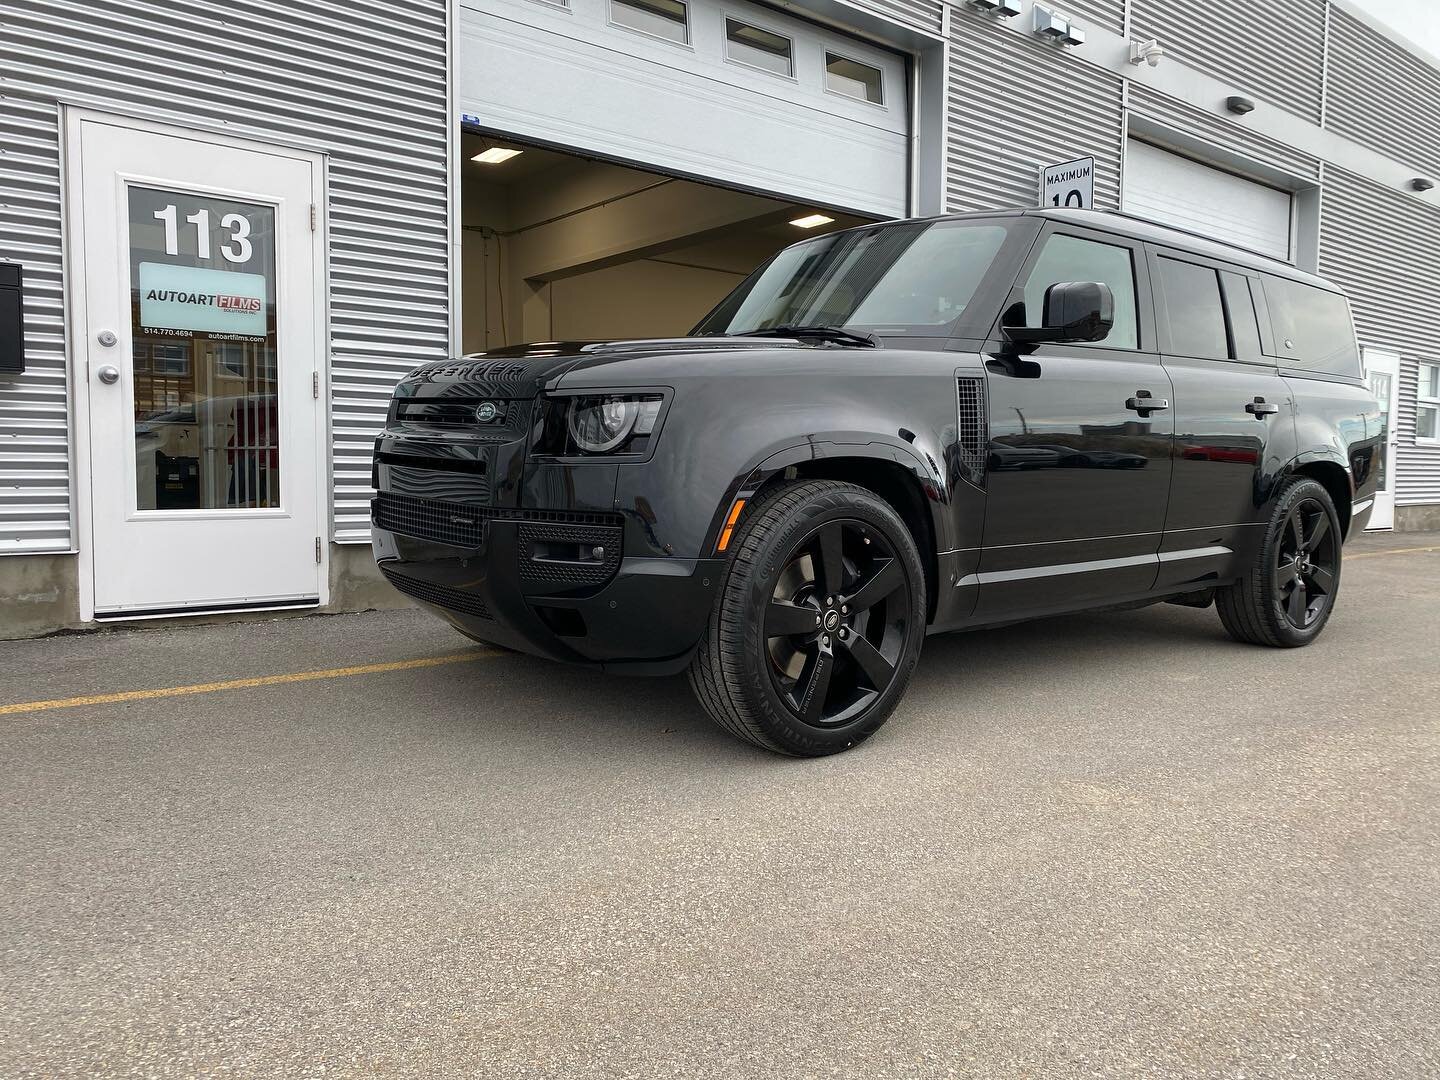 Ready for any adventure with this Land Rover Defender fully protected by our top-of-the-line full front paint protection film kit. No matter where the journey takes you, your Defender will be ready for anything. #LandRoverDefender #PaintProtection #O